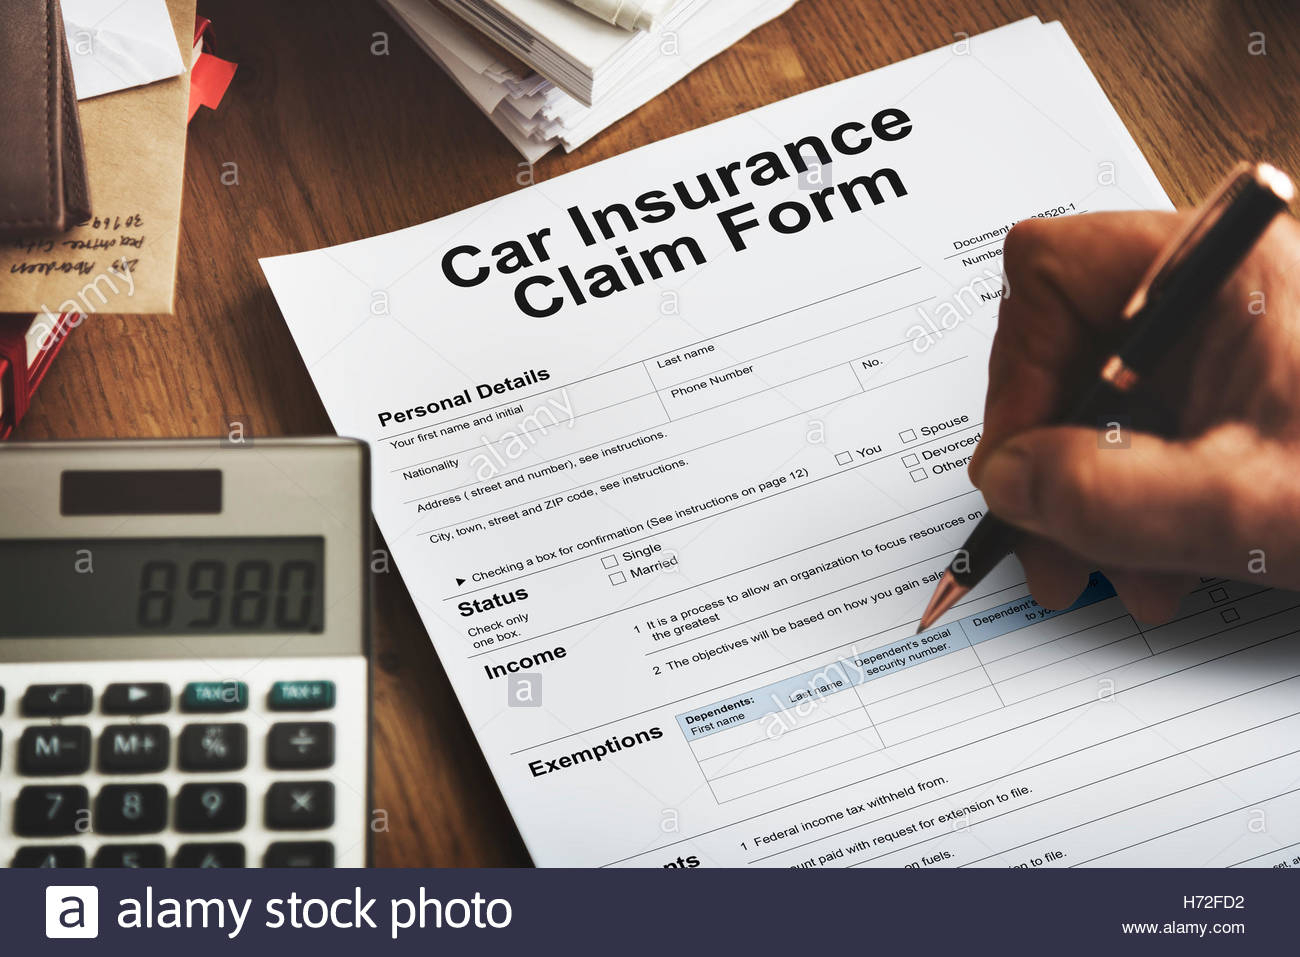 Vehicle Car Insurance Claim Form Concept Stock Photo pertaining to dimensions 1300 X 957